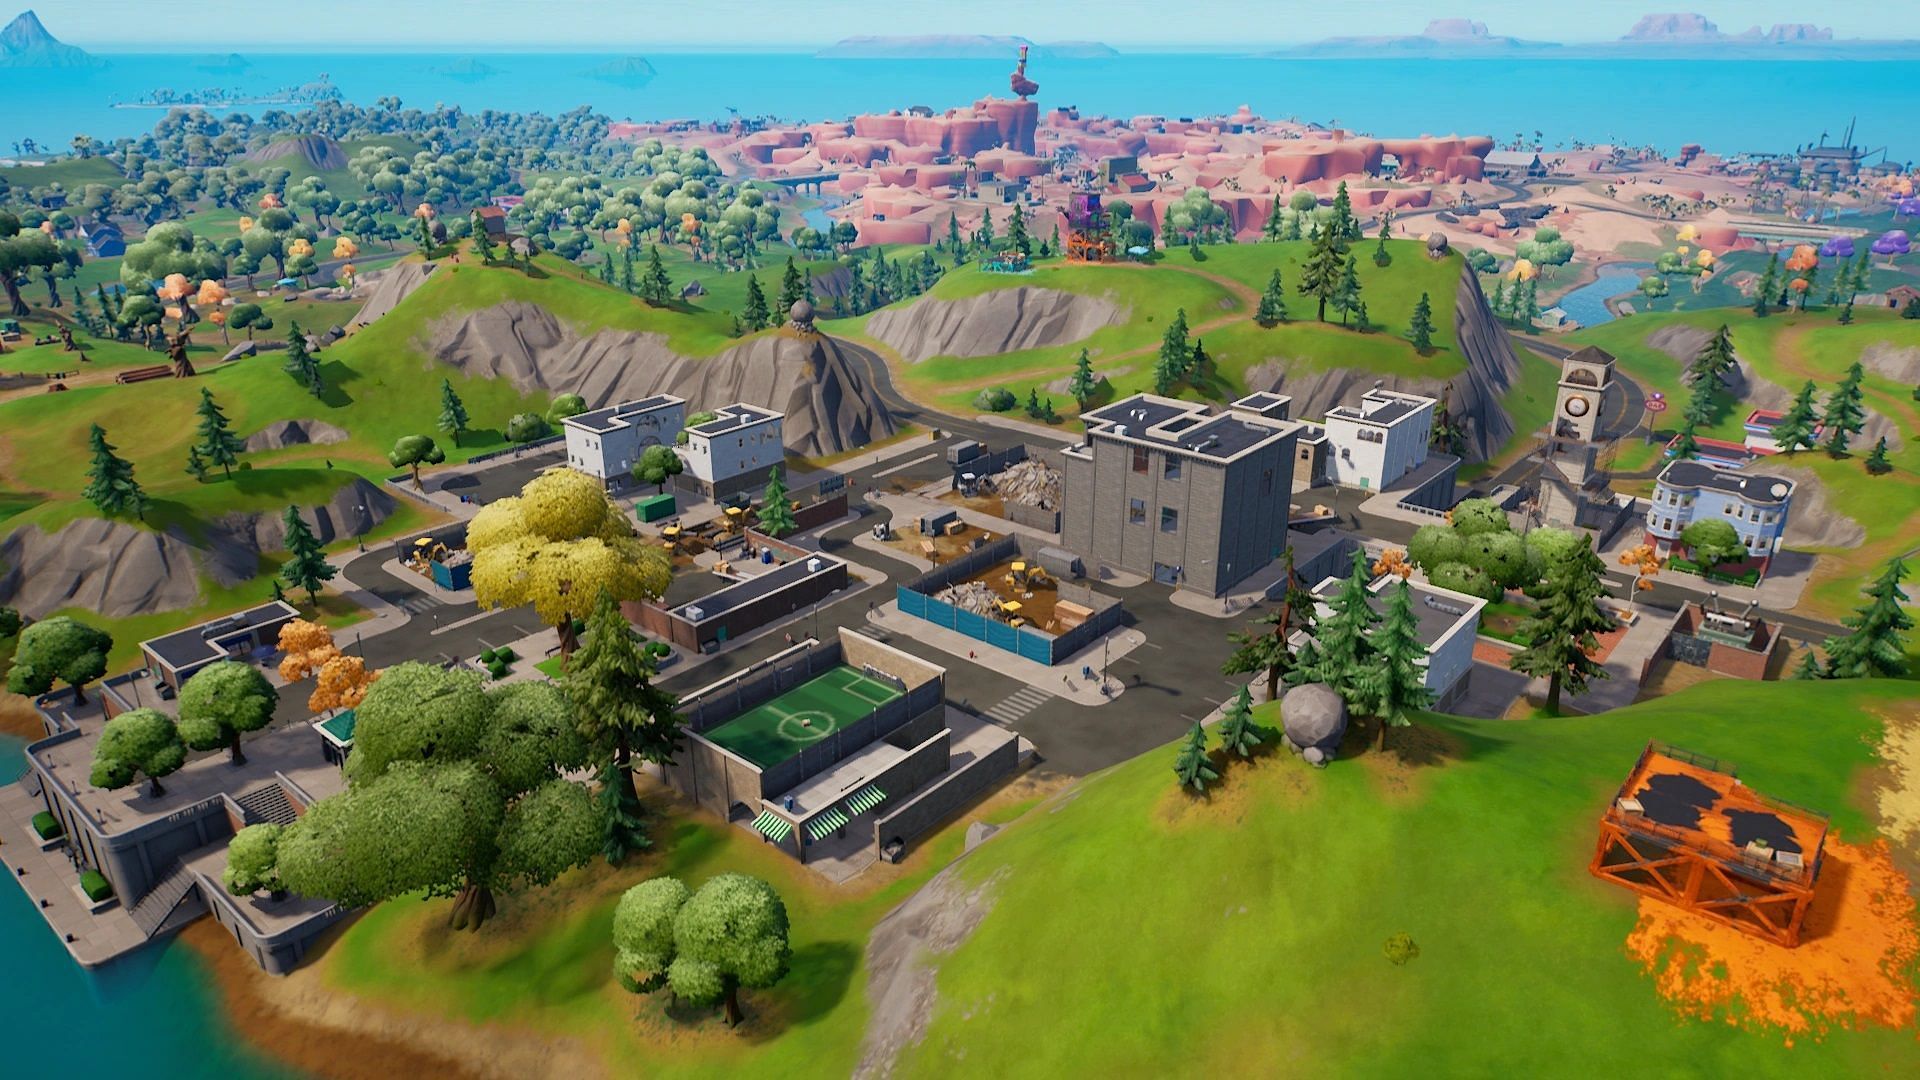 Fortnite players will be able to choose the design of Tilted Towers (Image via Epic Games)